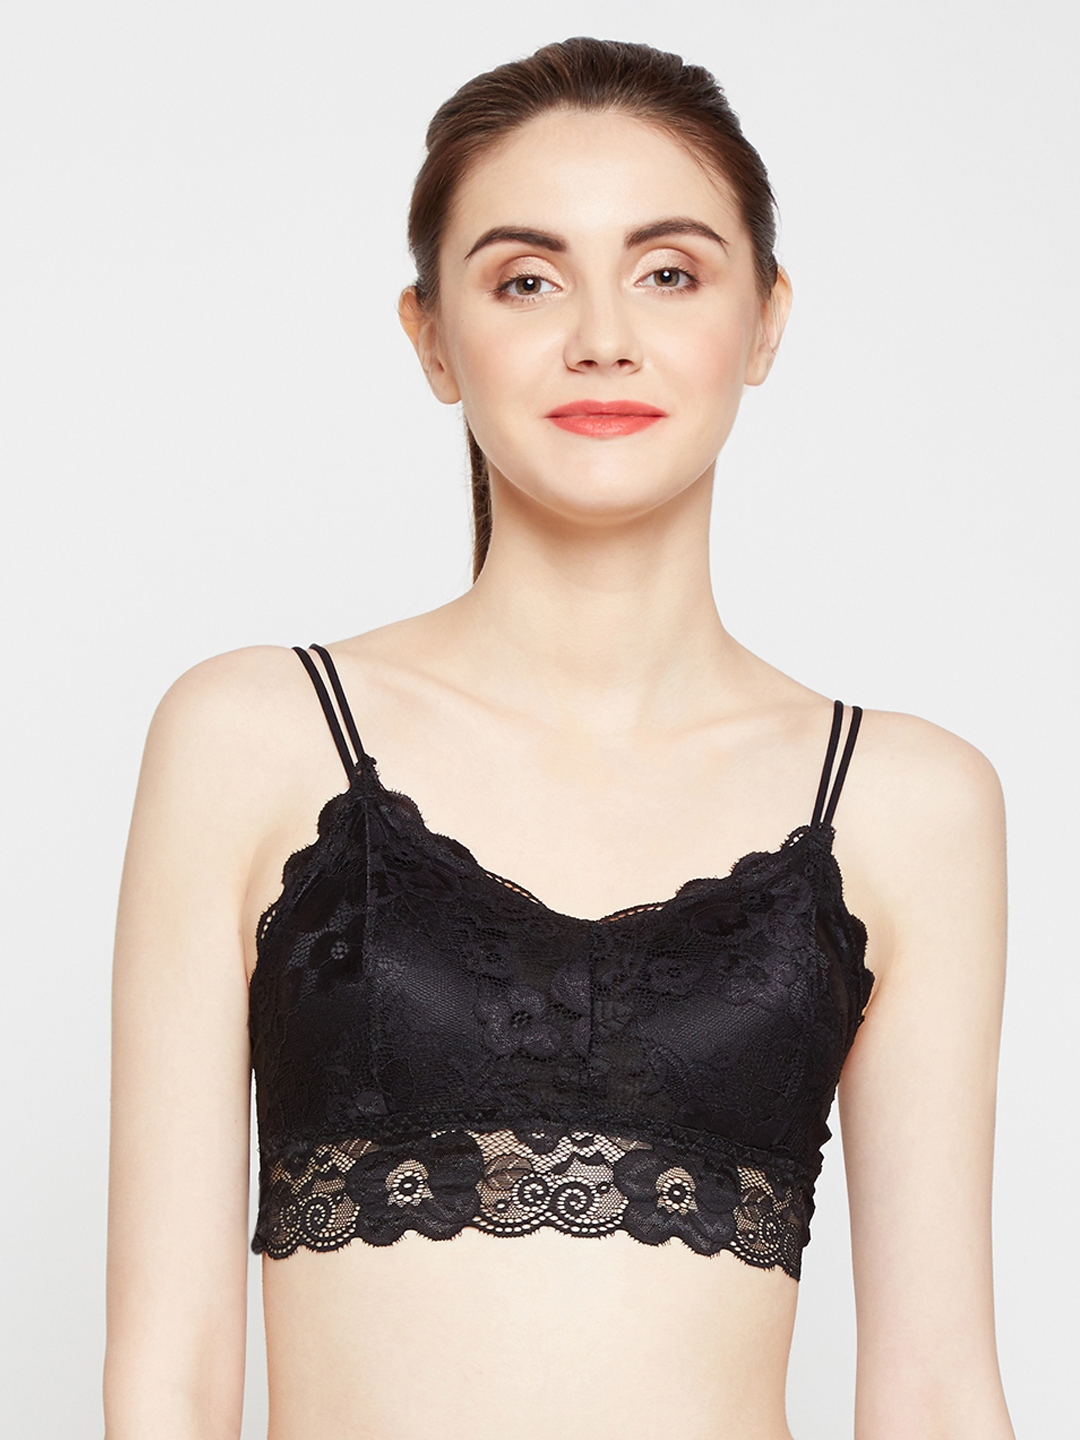 Buy Padded Non-Wired Longline Bralette in Black - Lace Online